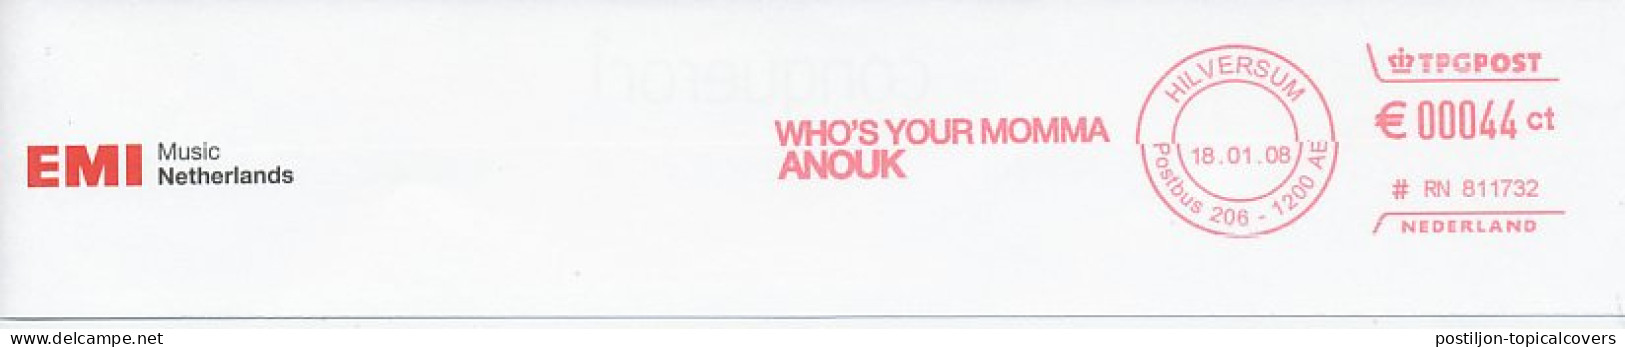 Meter Top Cut Netherlands 2008 Anouk - Album - Who S Your Momma - Music